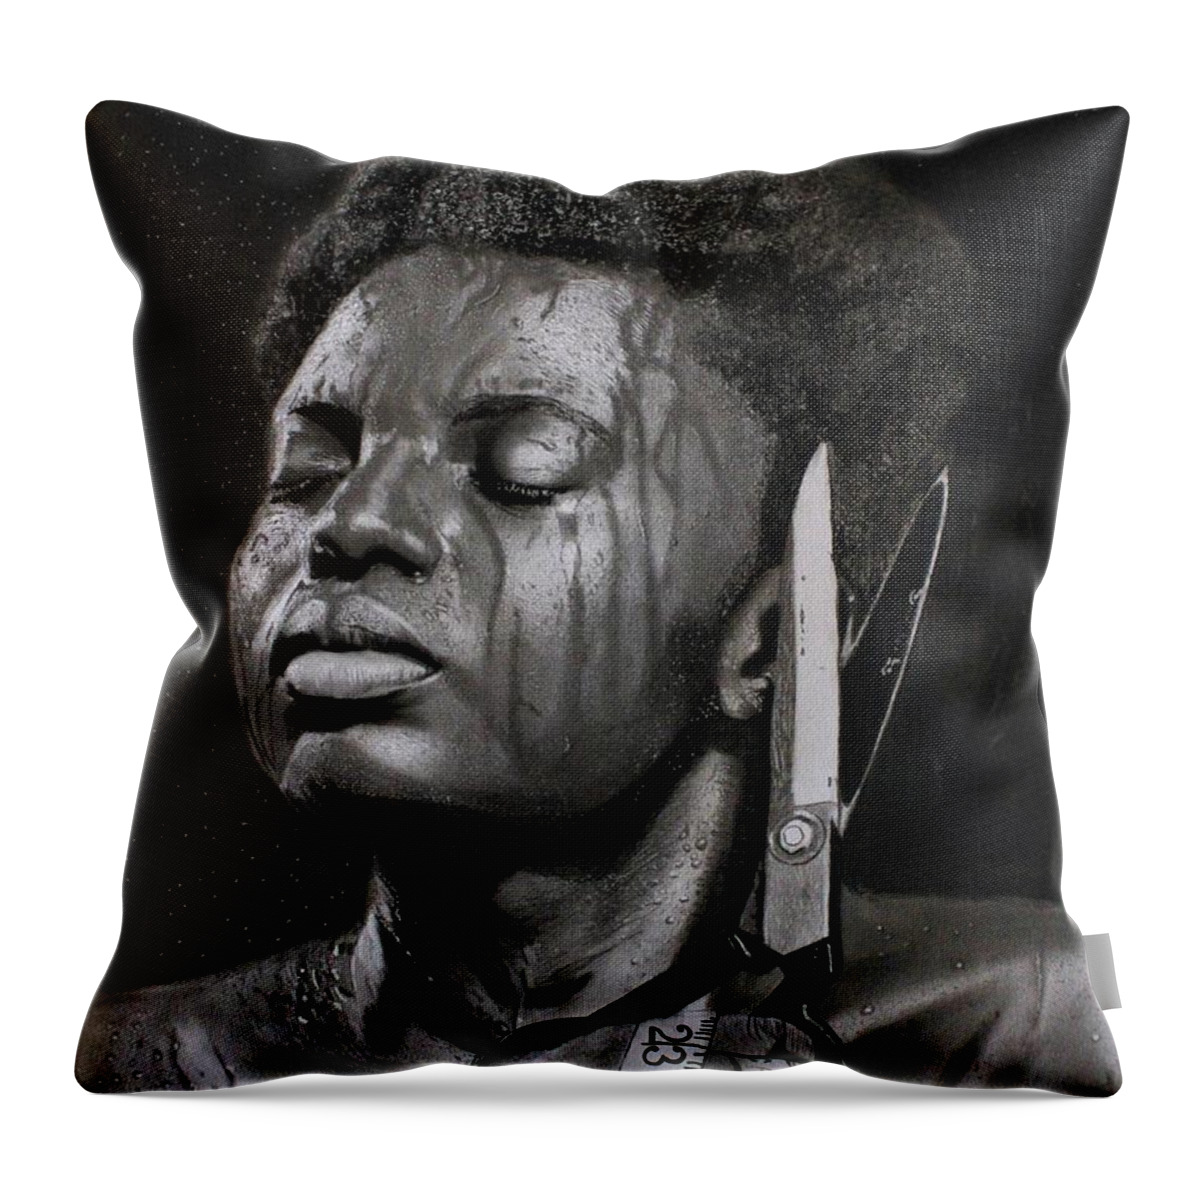 Hyperrealism Throw Pillow featuring the drawing OM3- Olivier Mub by Olivier Mub